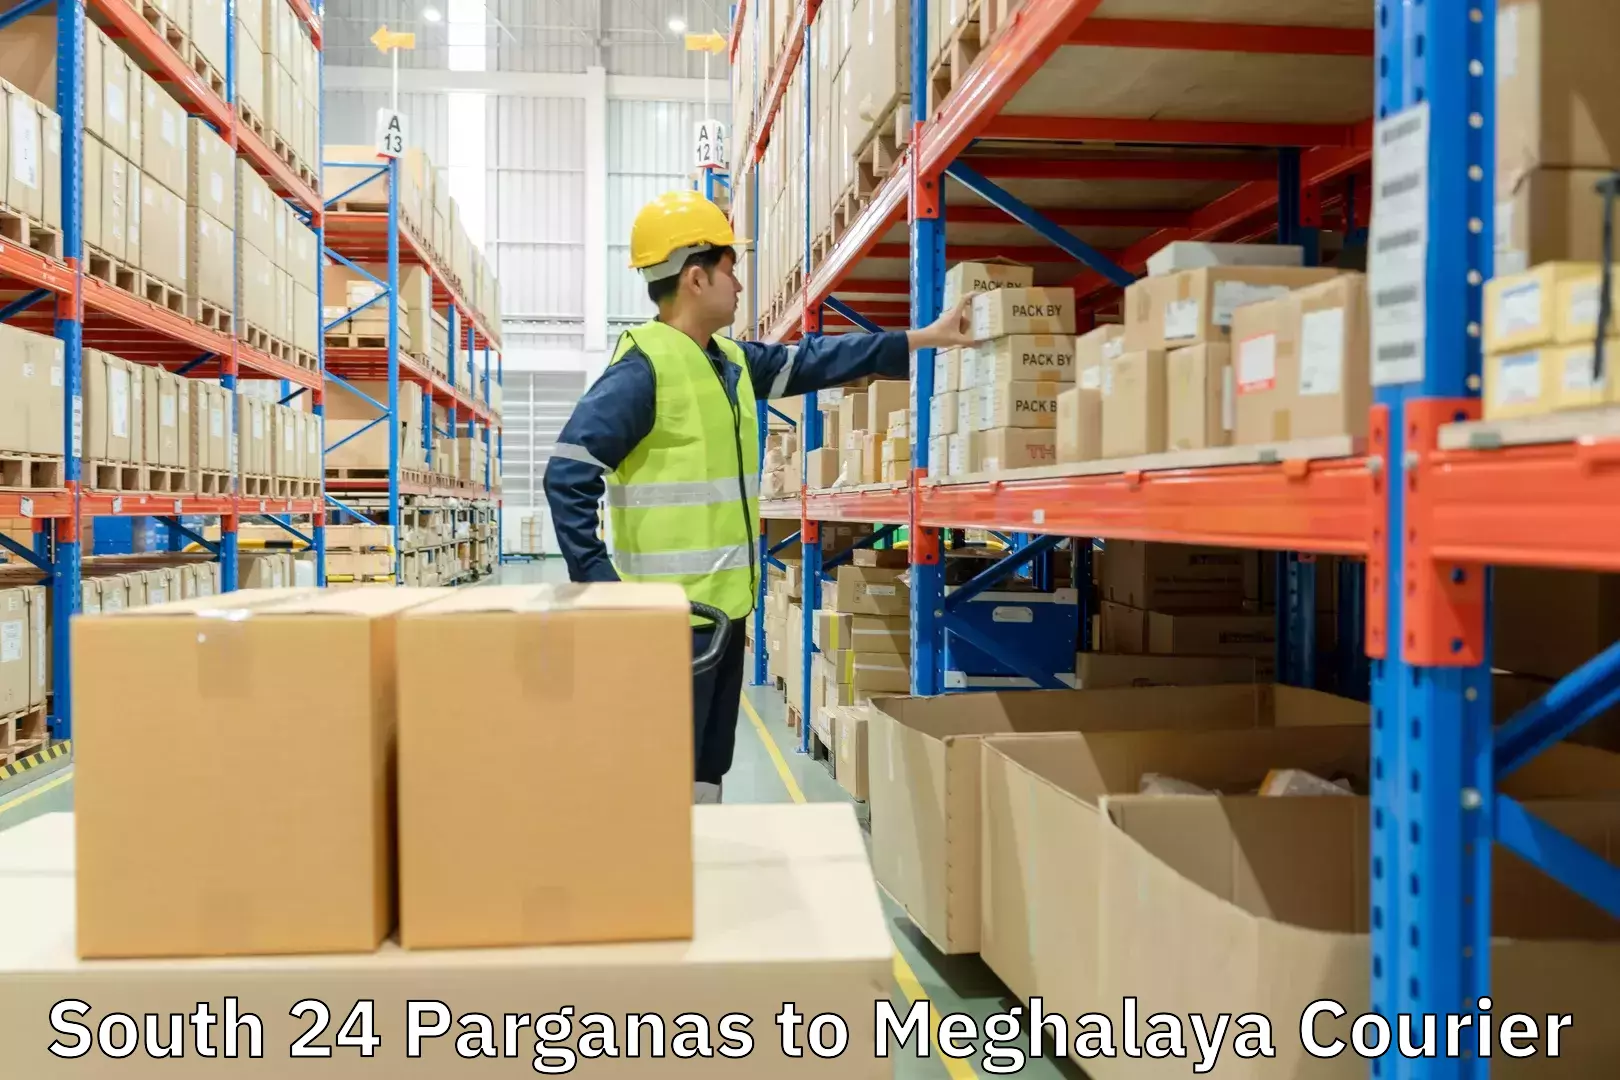 Subscription-based courier South 24 Parganas to Meghalaya